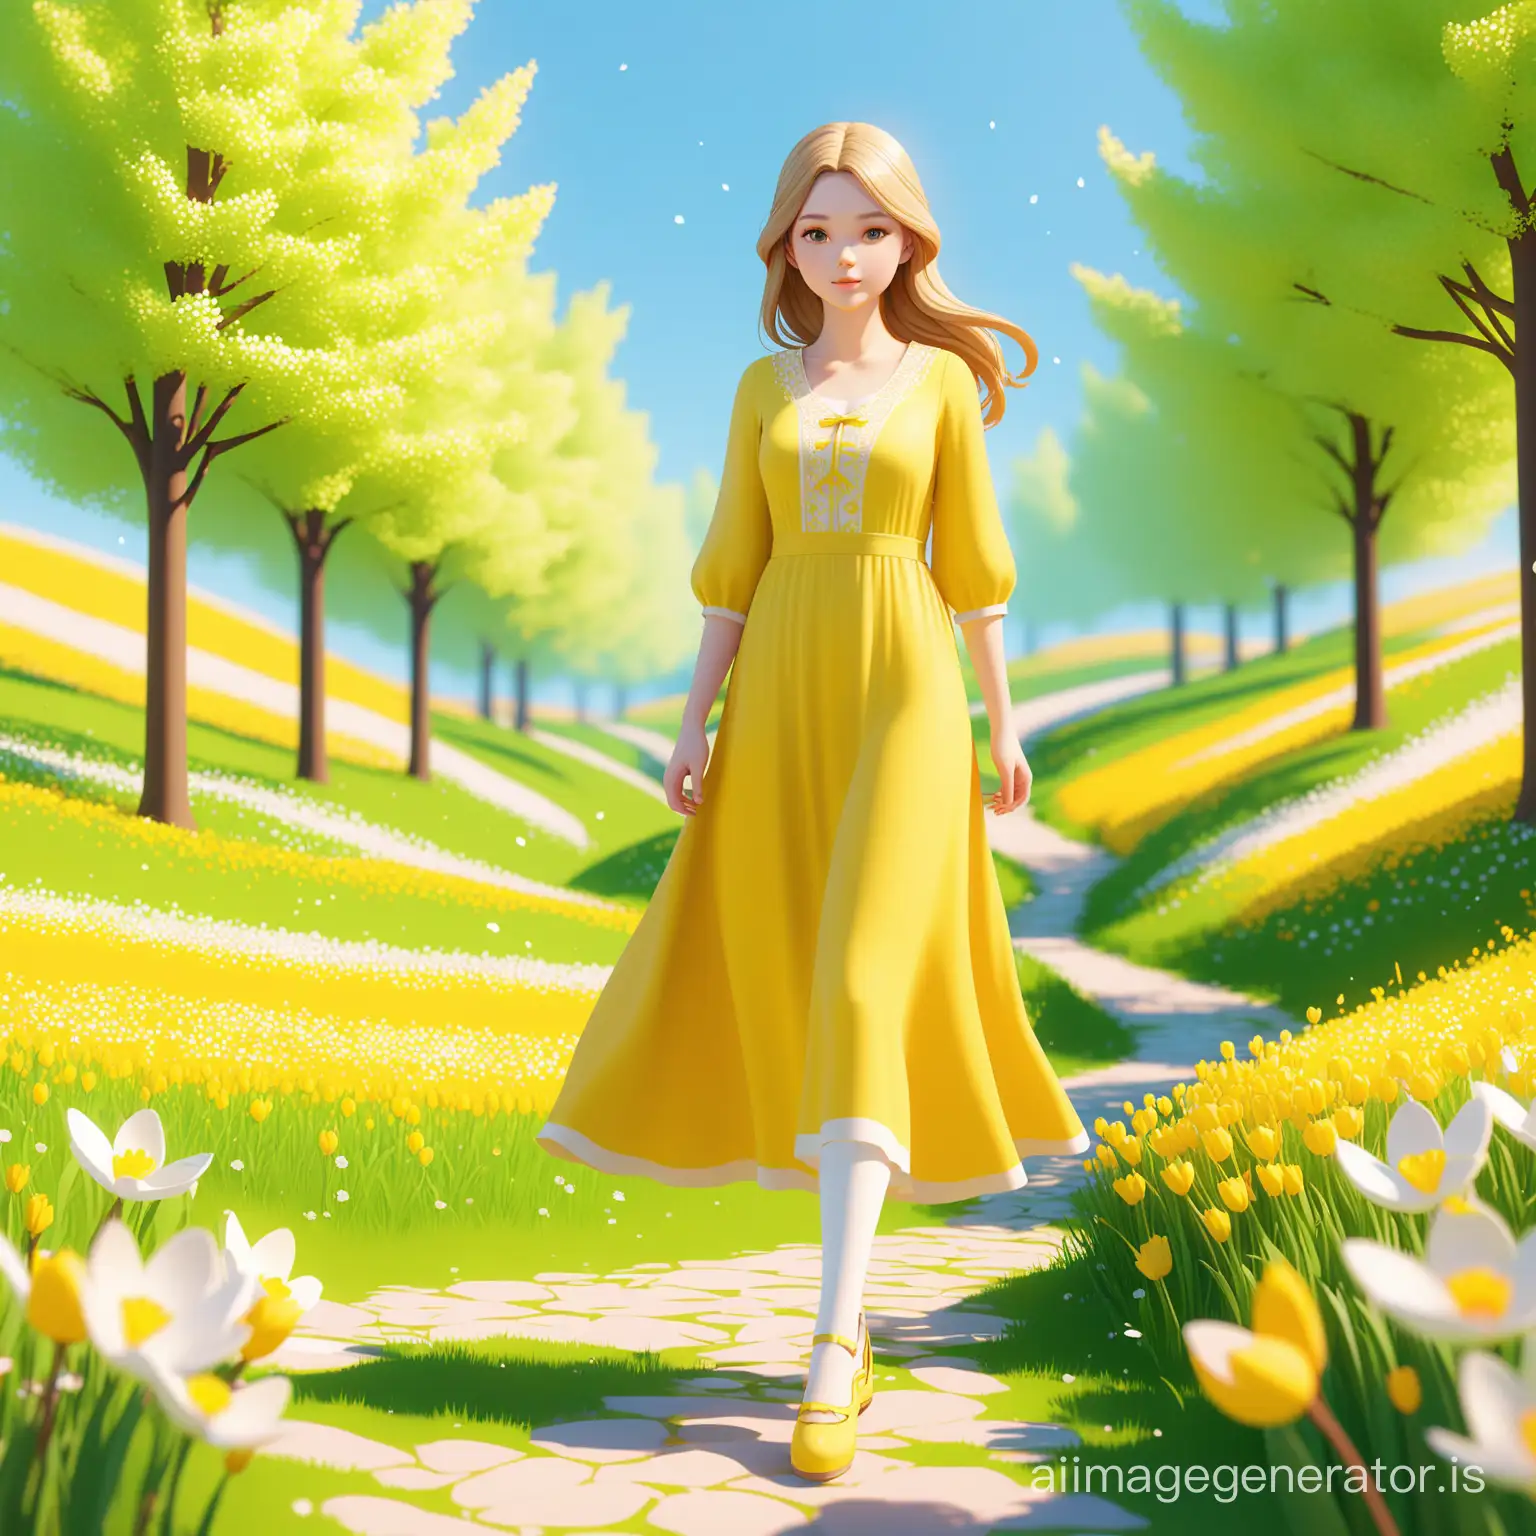 Stylized 3d graphics: spring landscape and girl wearing yellow maxi length dress, white tights, shoes